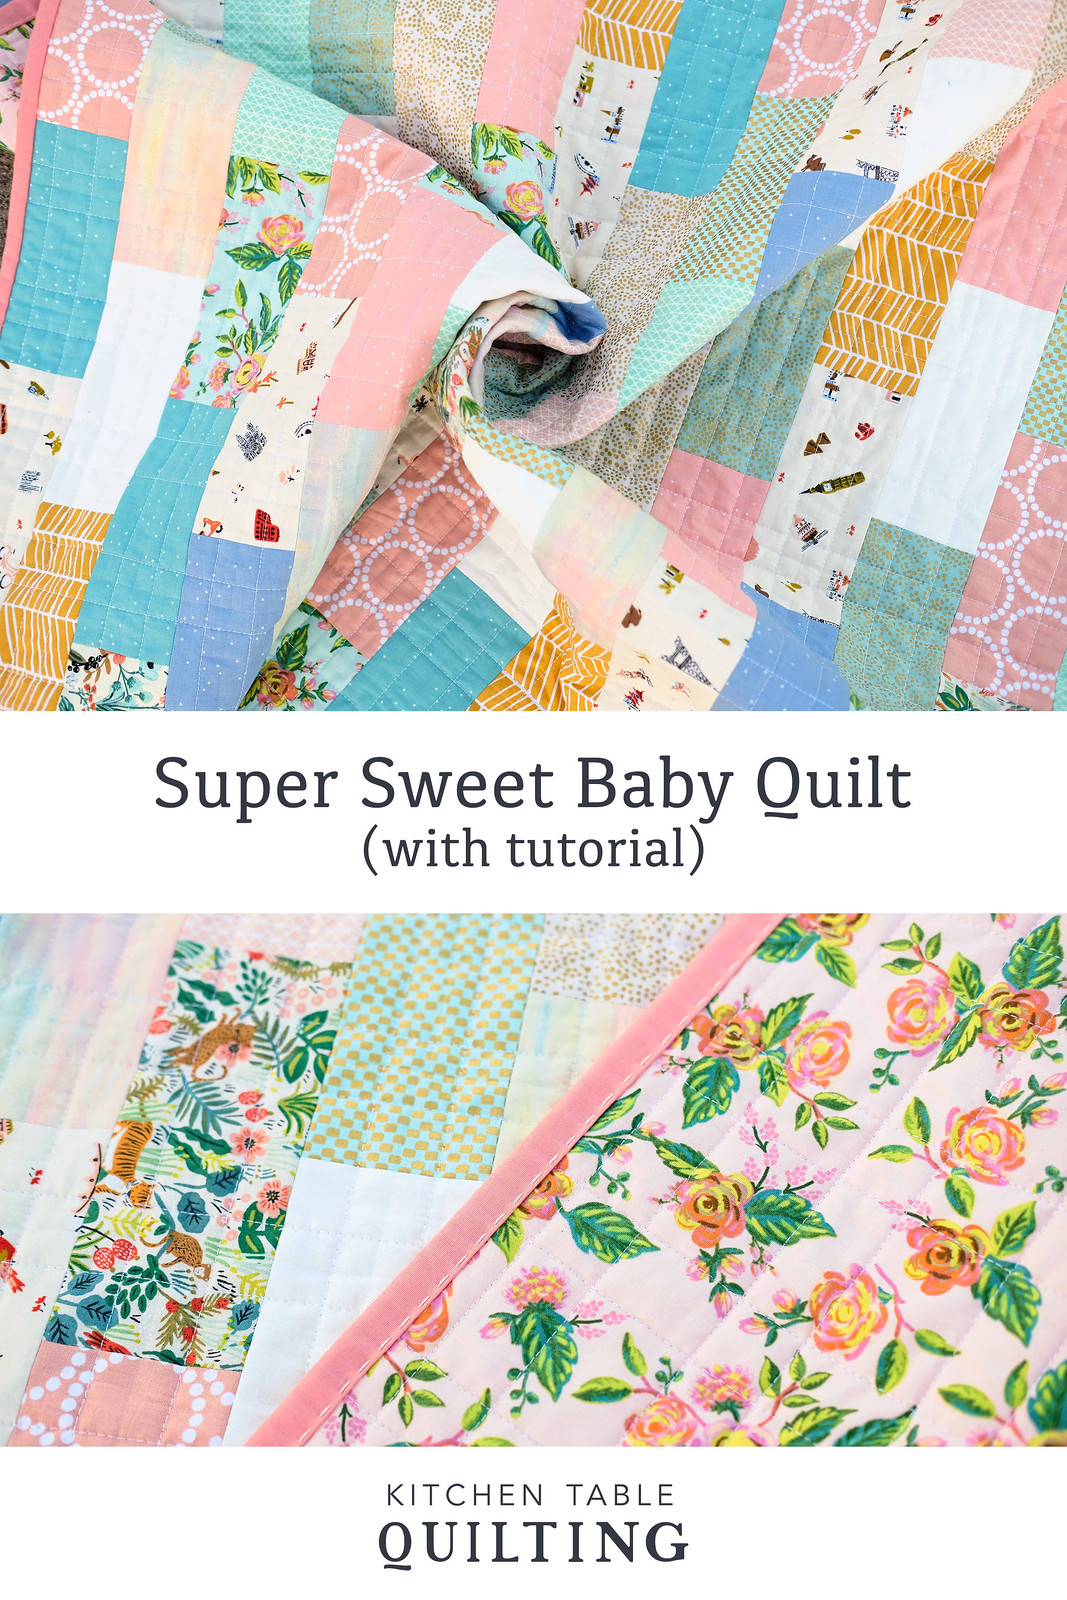 Super Sweet Baby Quilt - Kitchen Table Quilting